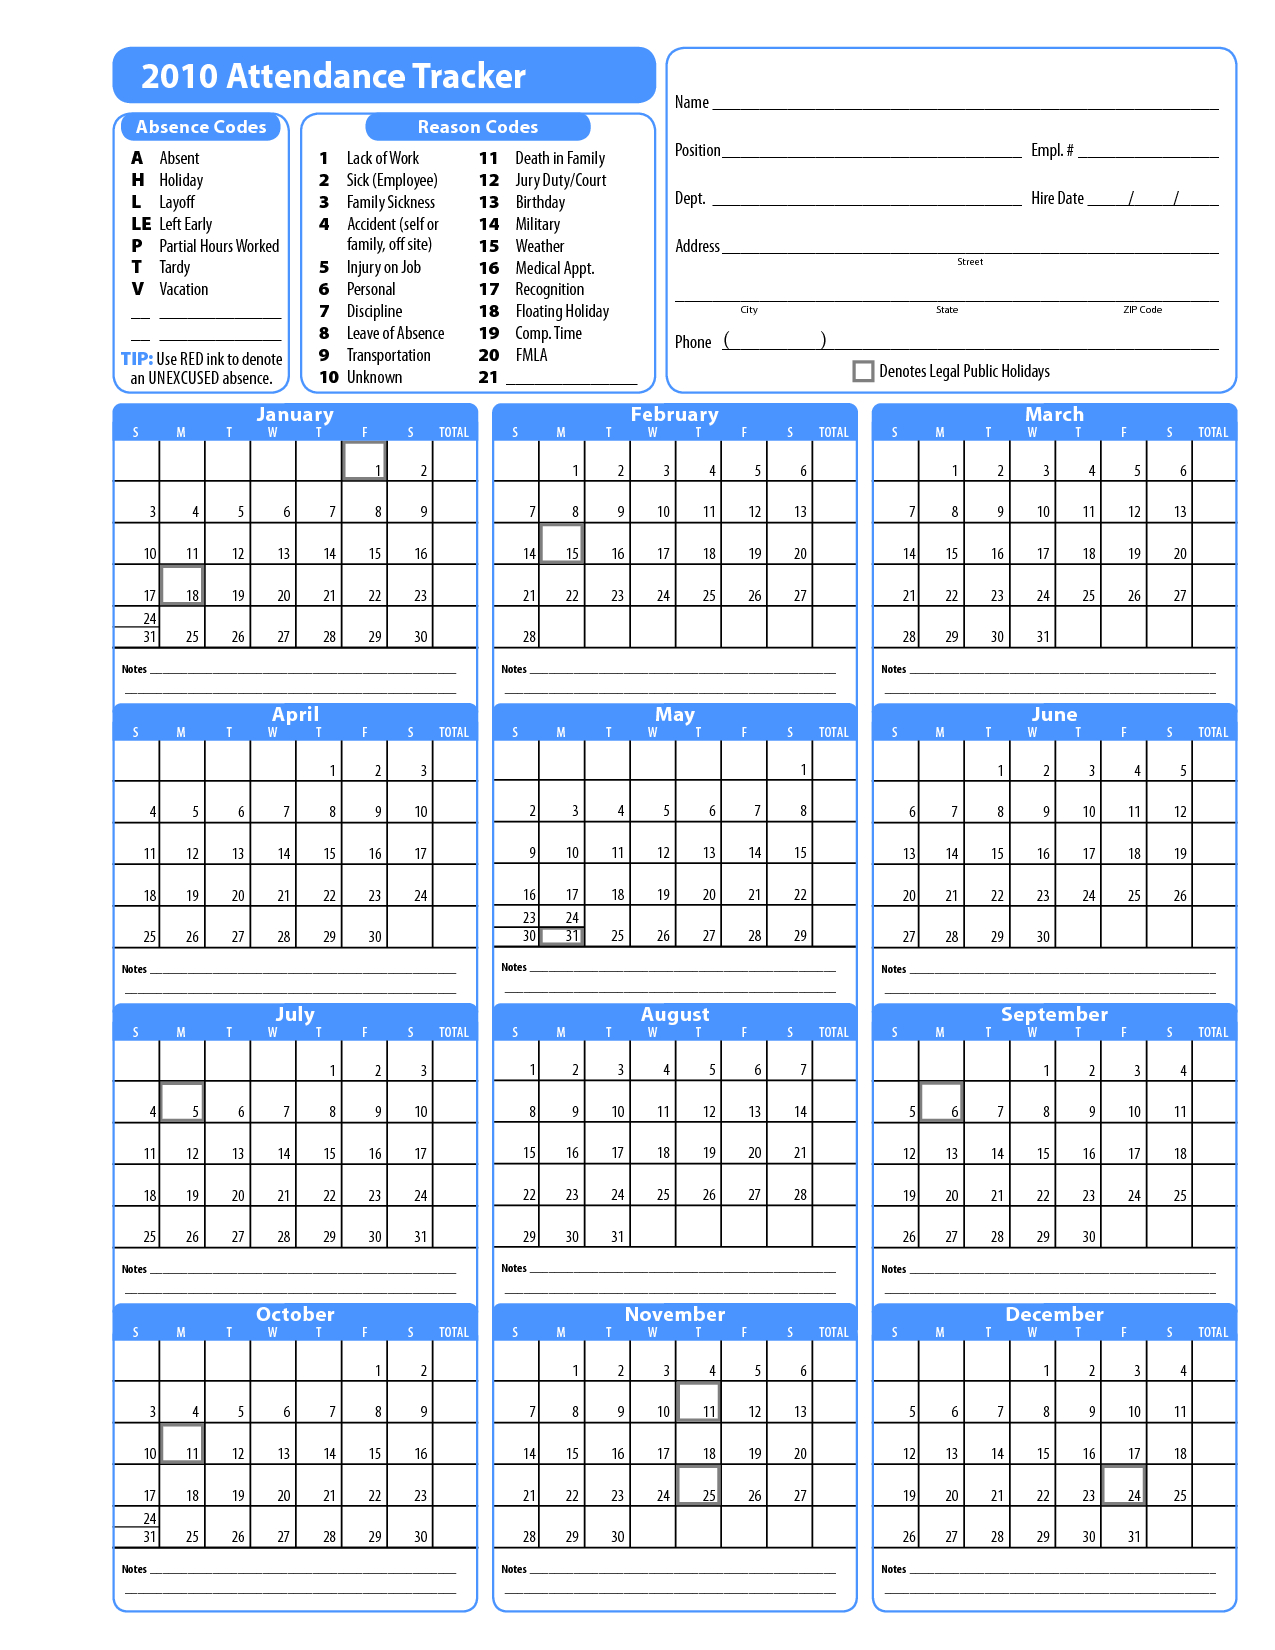 Free Employee Attendance Tracker 2020 Employee Attendance Tracker Template Perfect Excel Heet To Tracker Employee Training For Tracking Free Models Form Ideas Wifi Attendance Is Free For Up To 10 Employees Manda Shuey